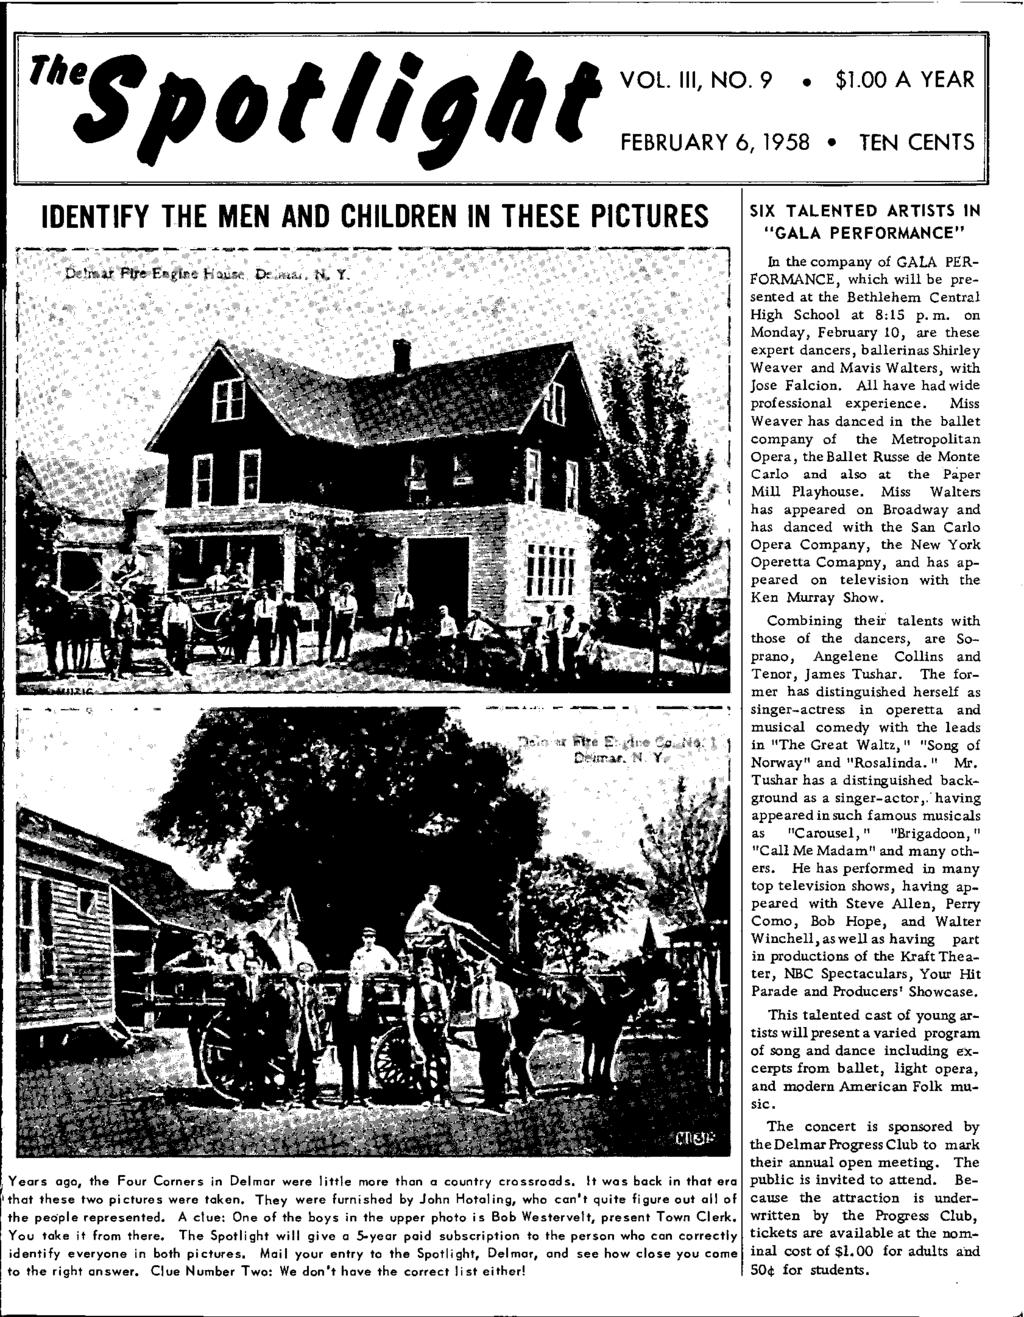 '"~pot I Ifill VOL Ill, NO. 9 $1.00 A YEAR FEBRUARY 6, 1958 TEN CENTS IDENTIFY THE MEN AND CHILDREN IN THESE PICTURES ~--- - ~.